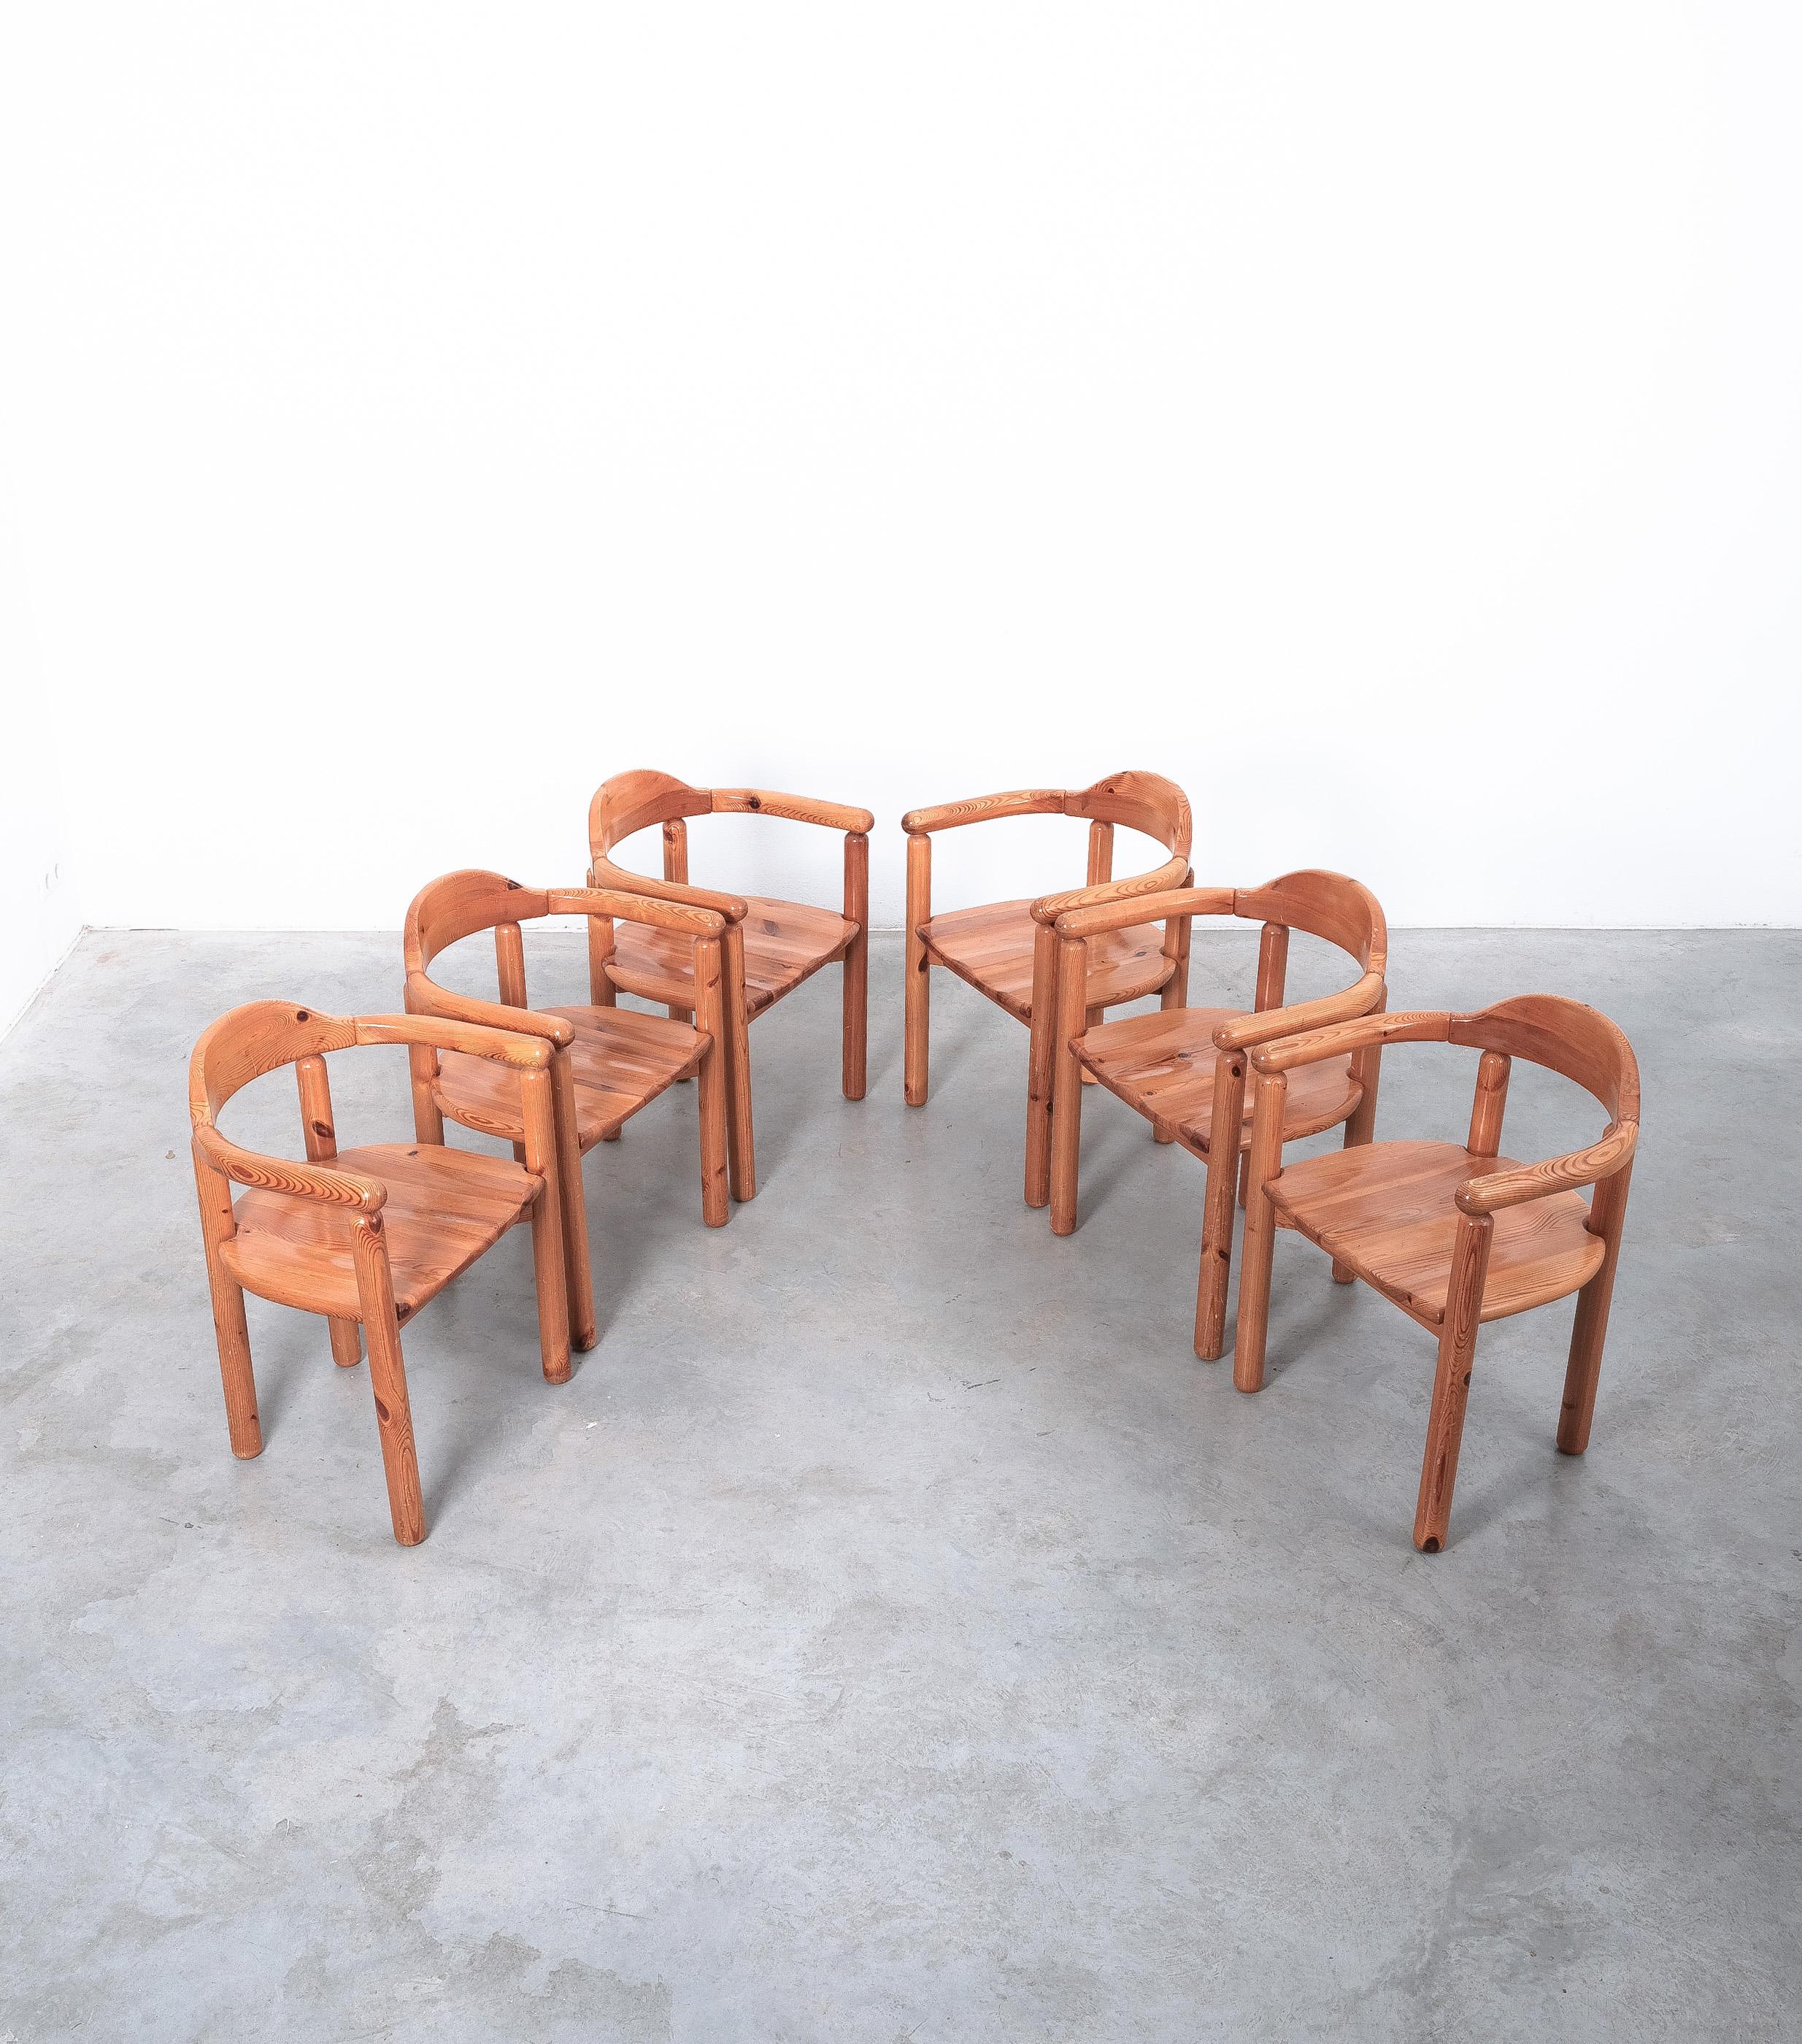 Rainer Daumiller Solid Pine Wood Dining Chairs '2' Danish Design, 1970 For Sale 6